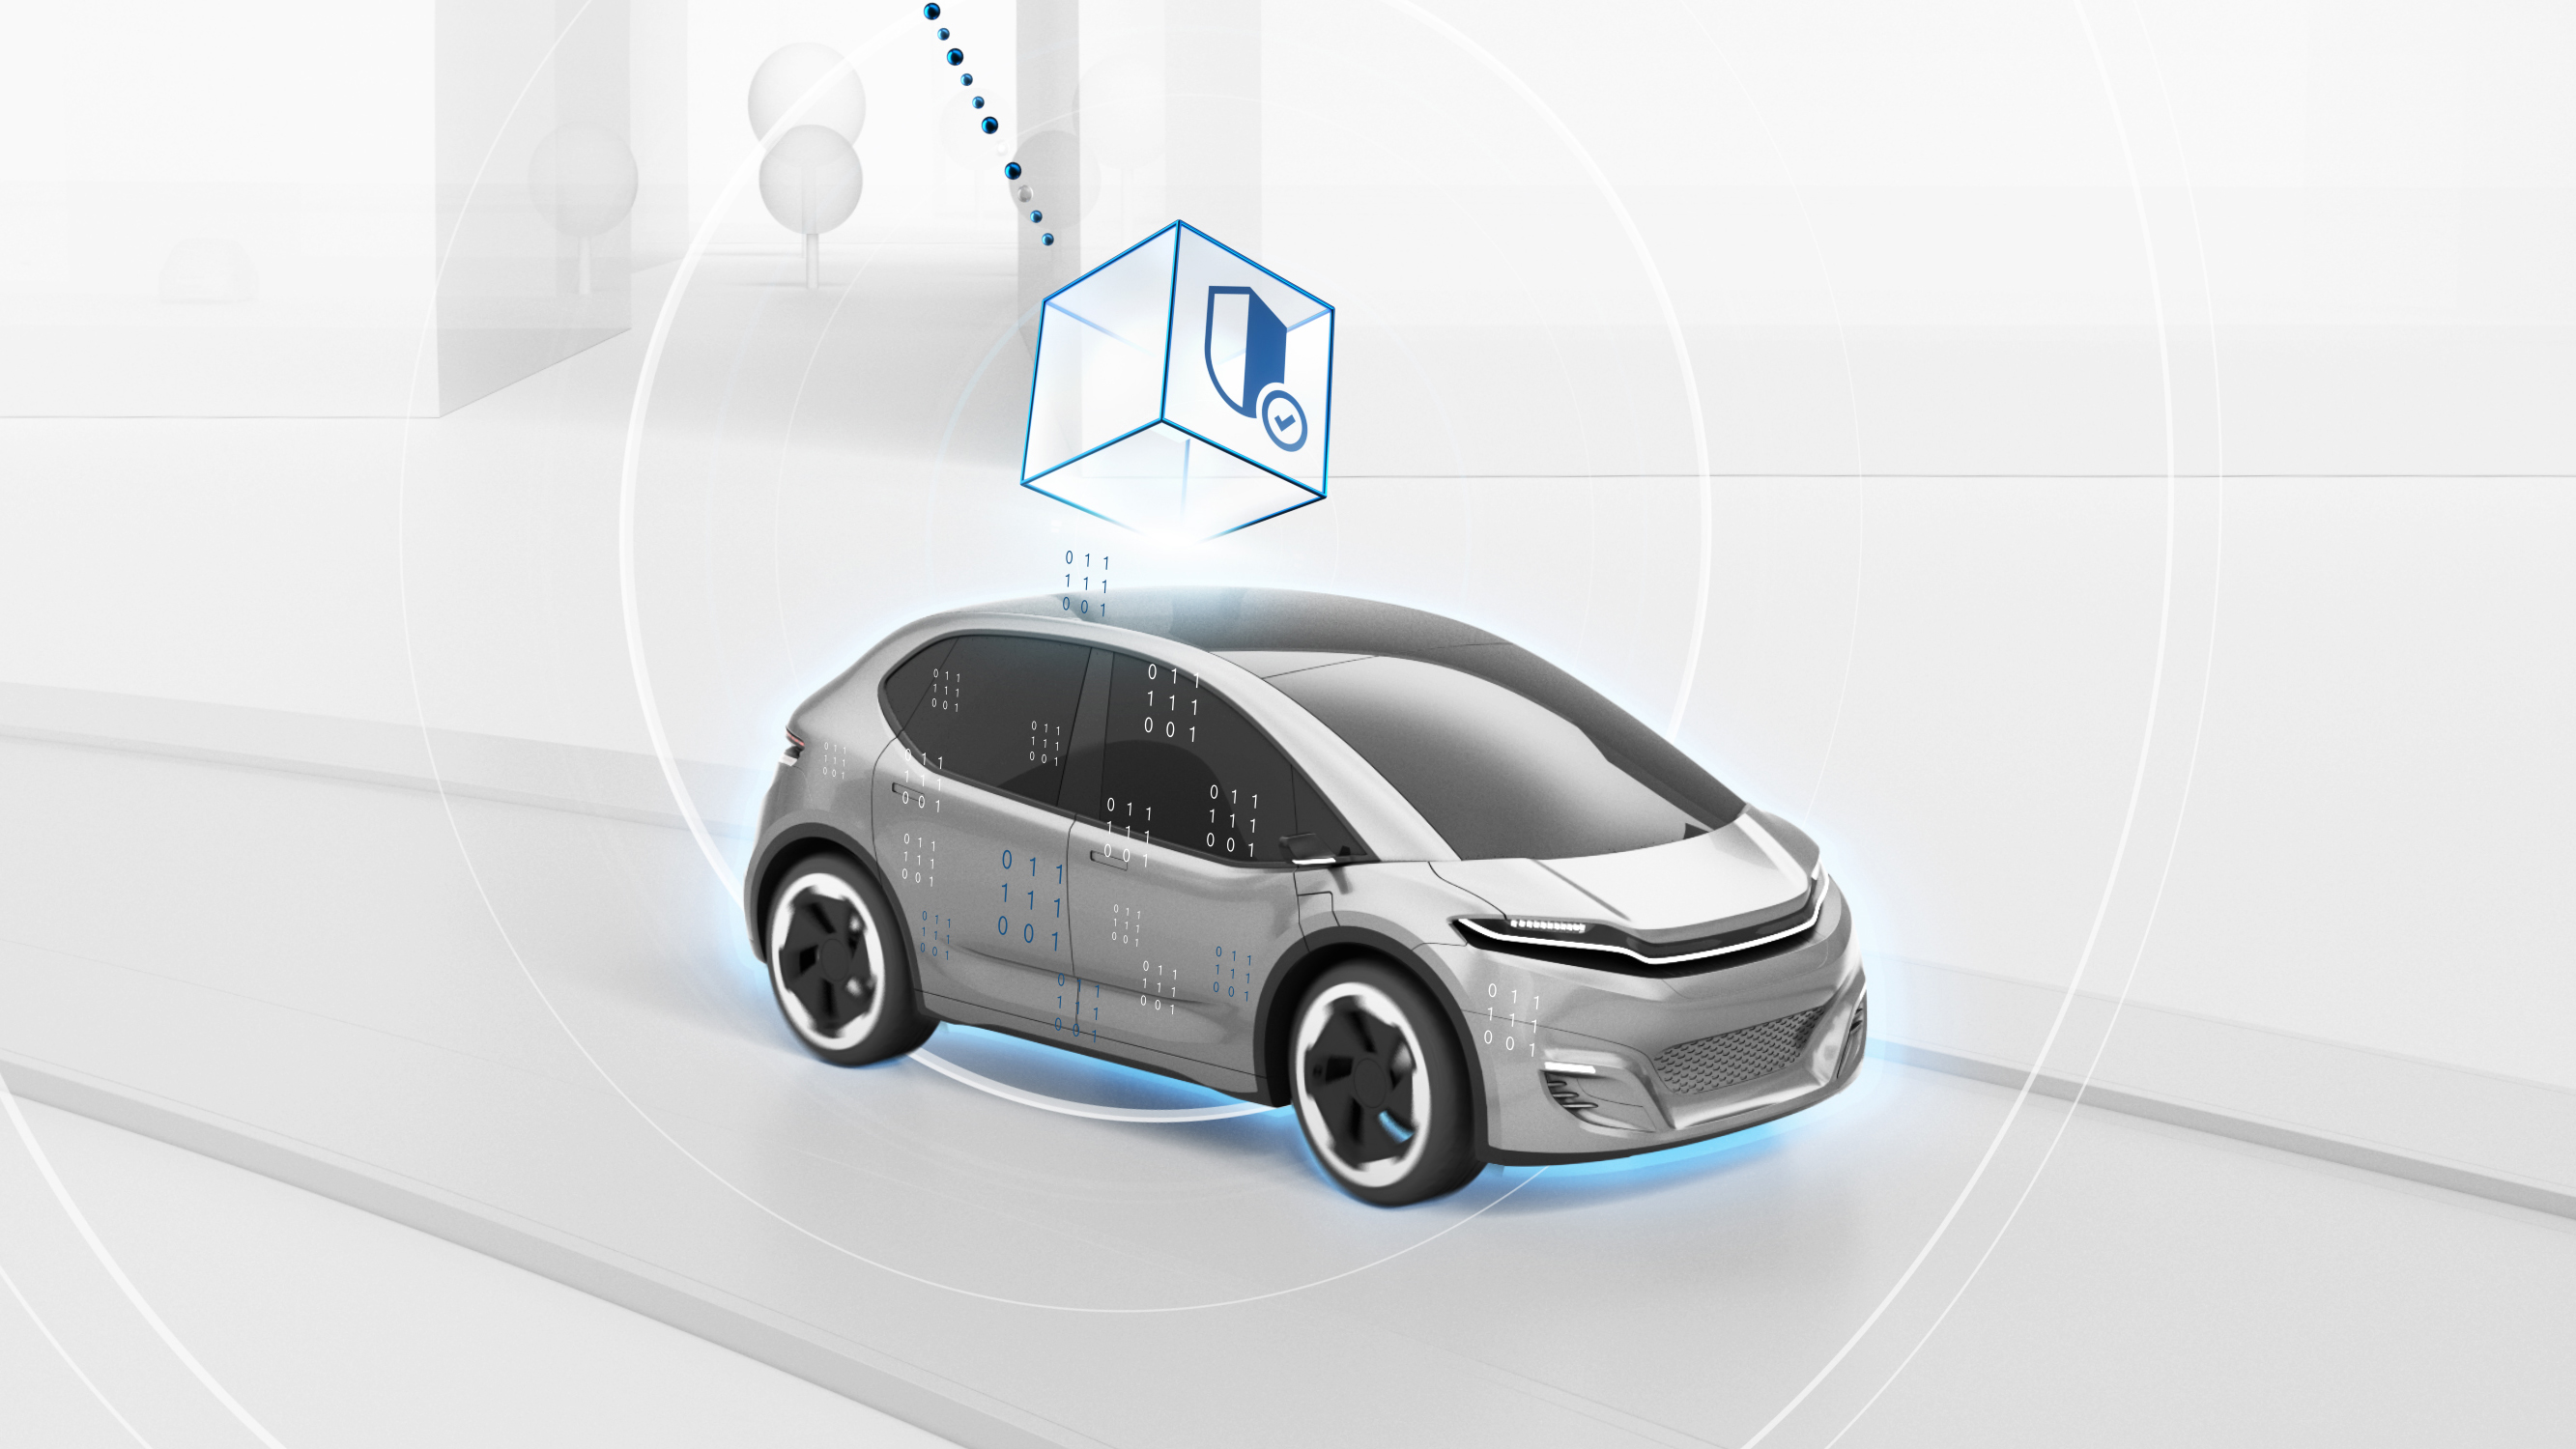 Bosch is developing the software-defined vehicle